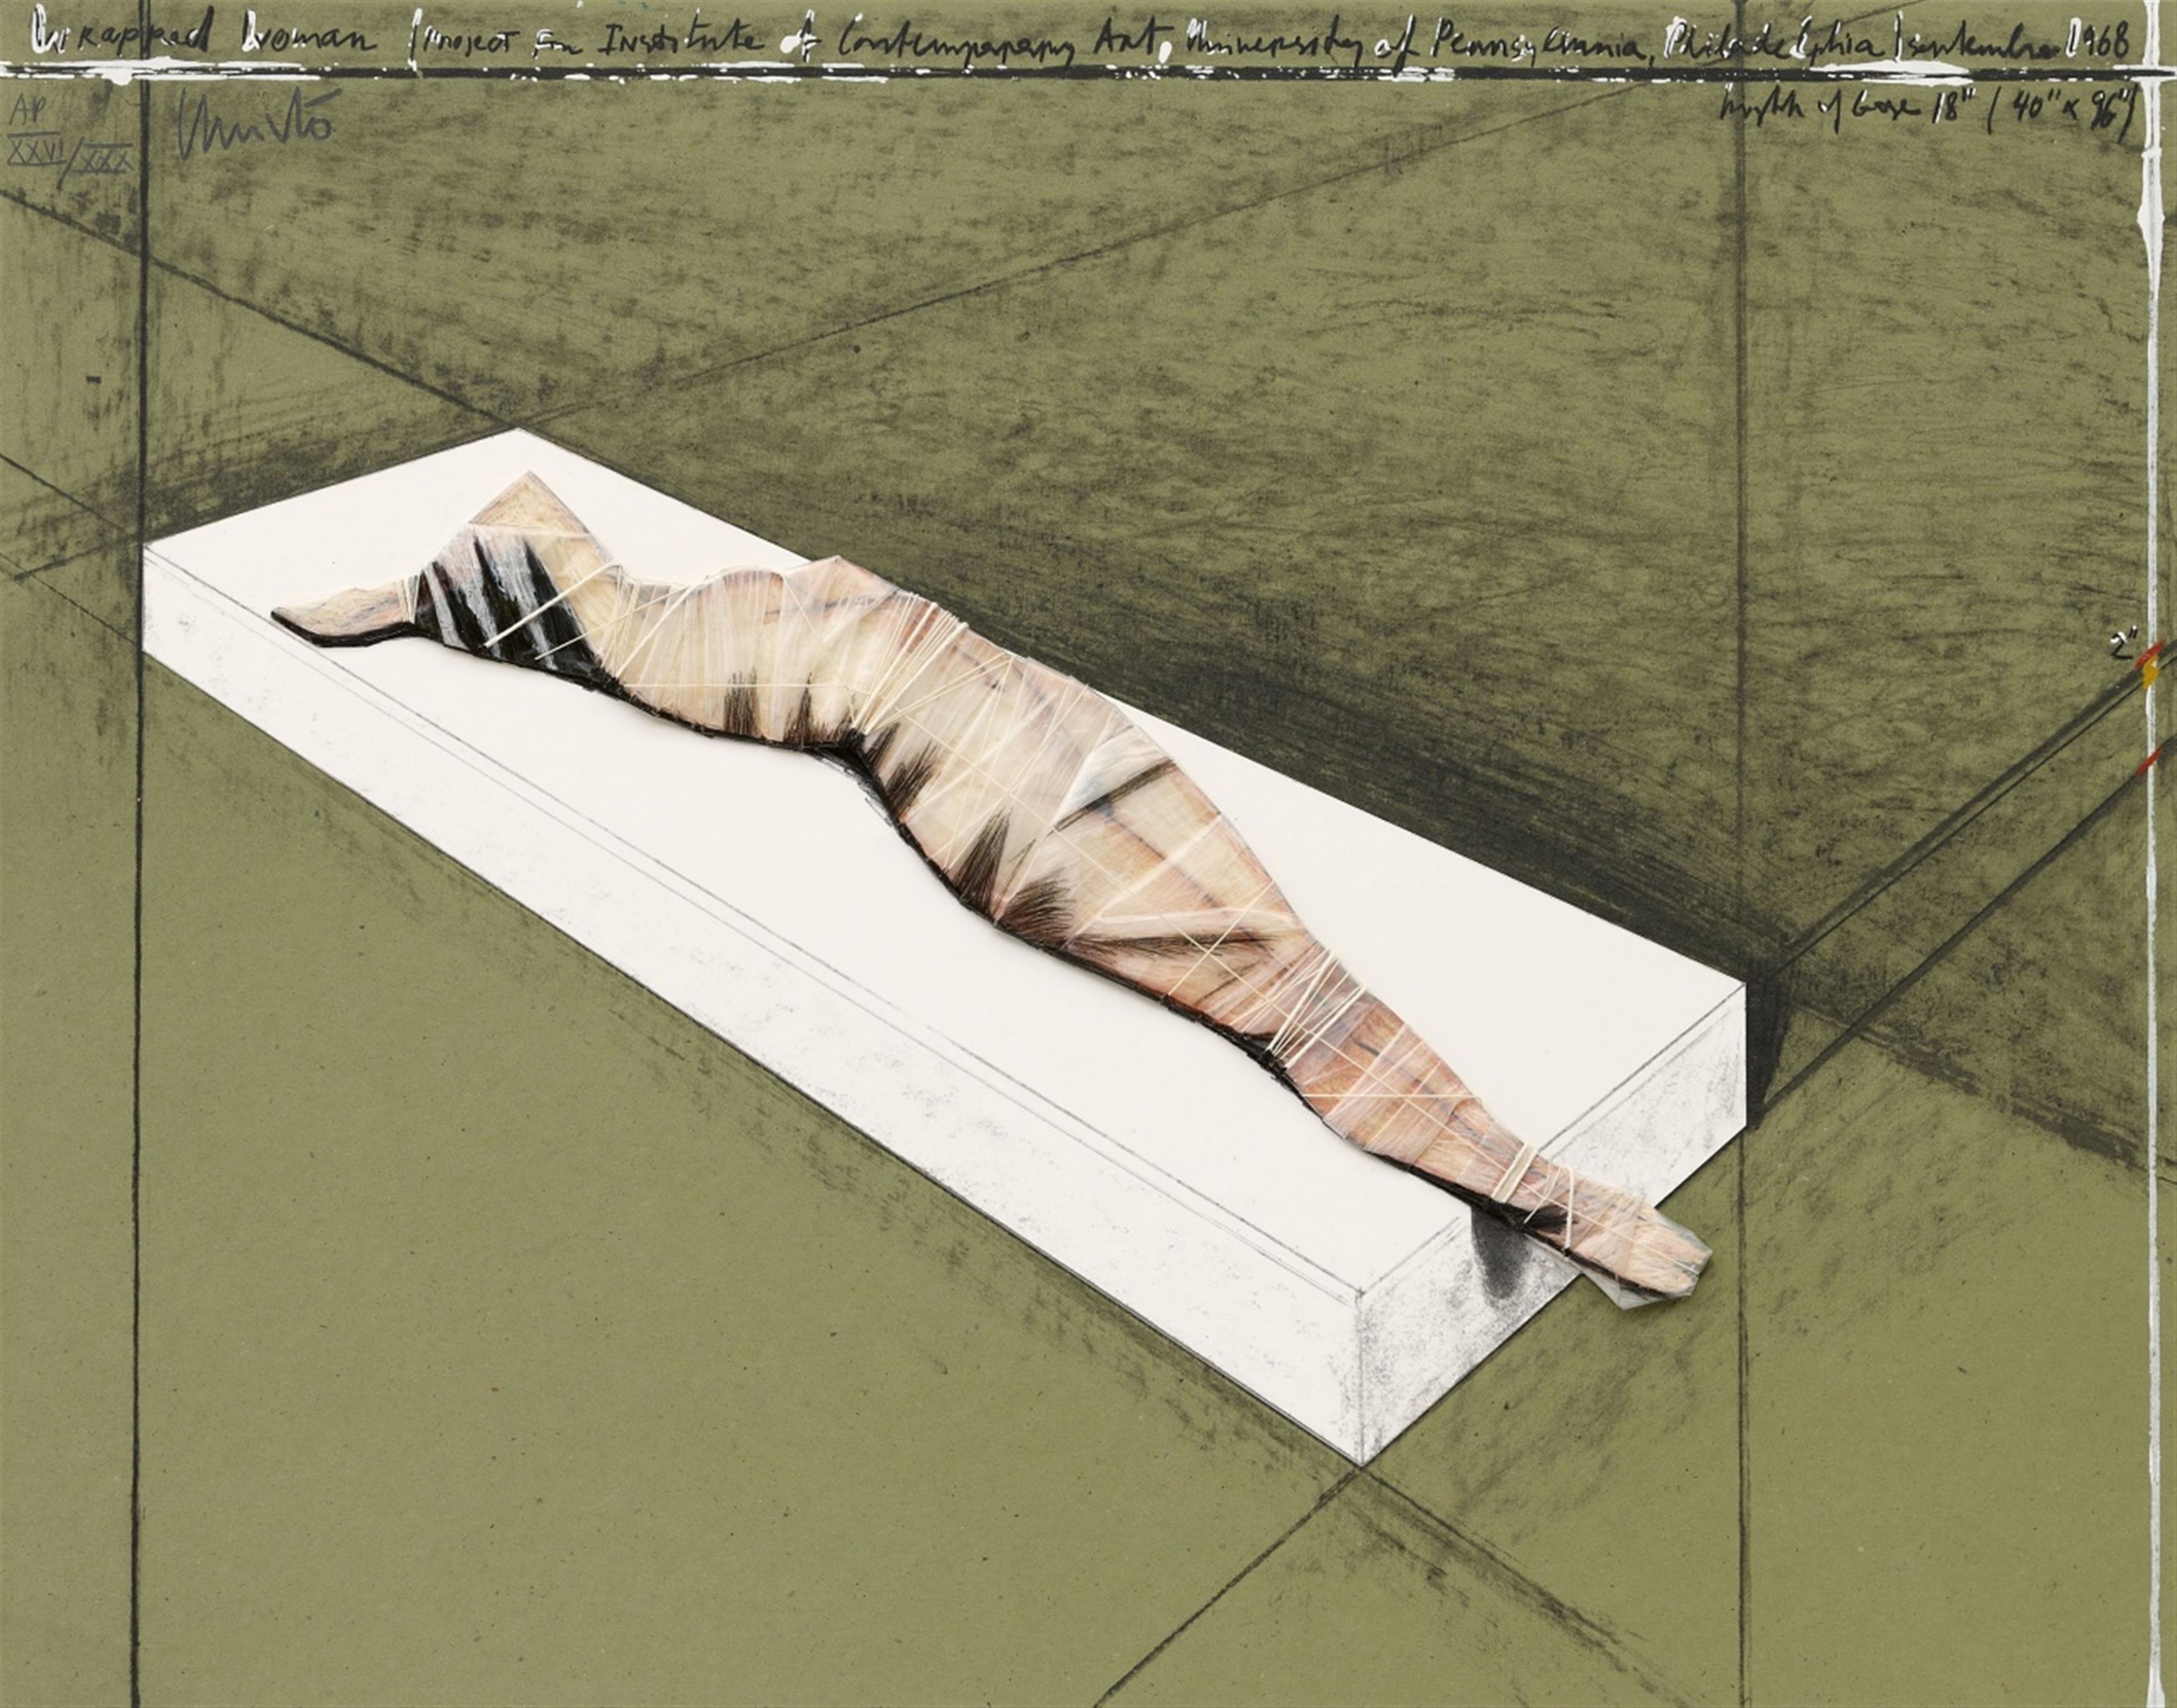 Christo - Wrapped Woman, Project for the Institute of Contemporary Art, Philadelphia, 1968 - image-1